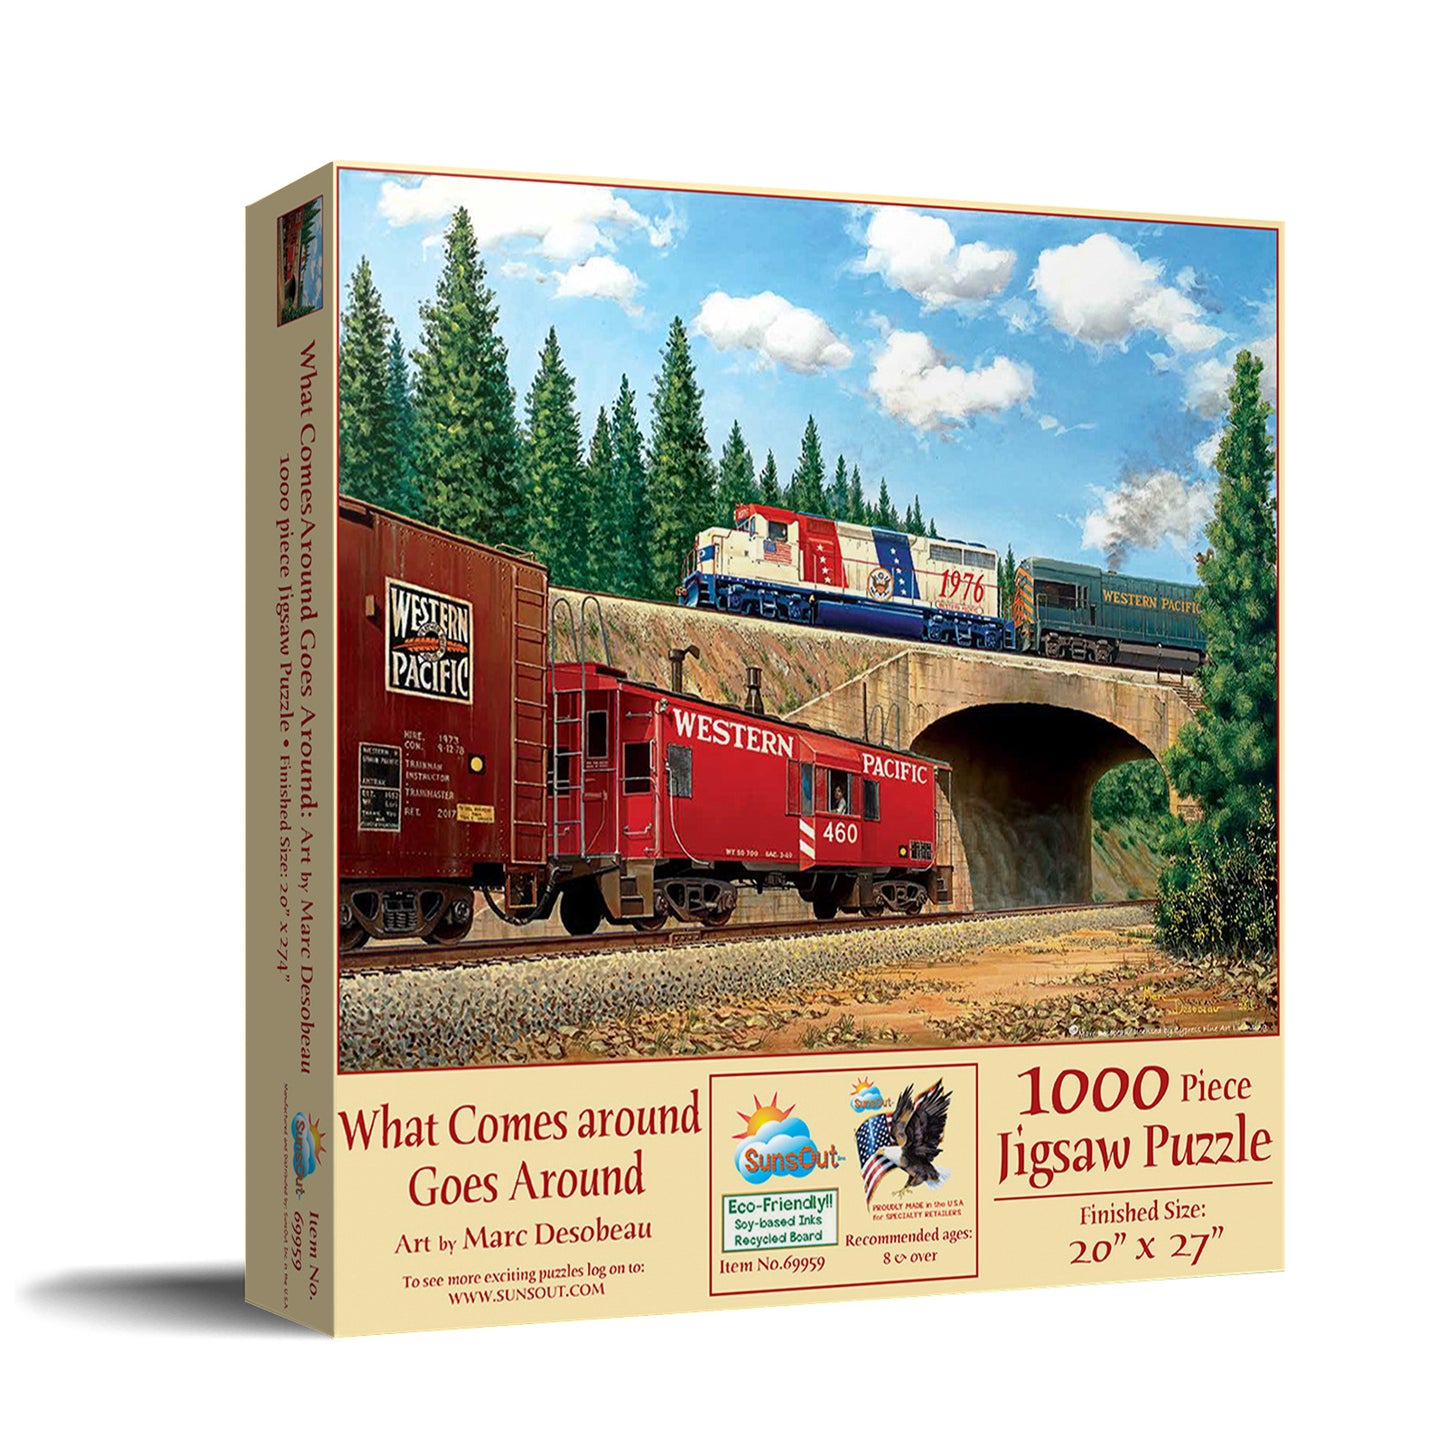 What Comes Around Goes Around - 1000 Piece Jigsaw Puzzle